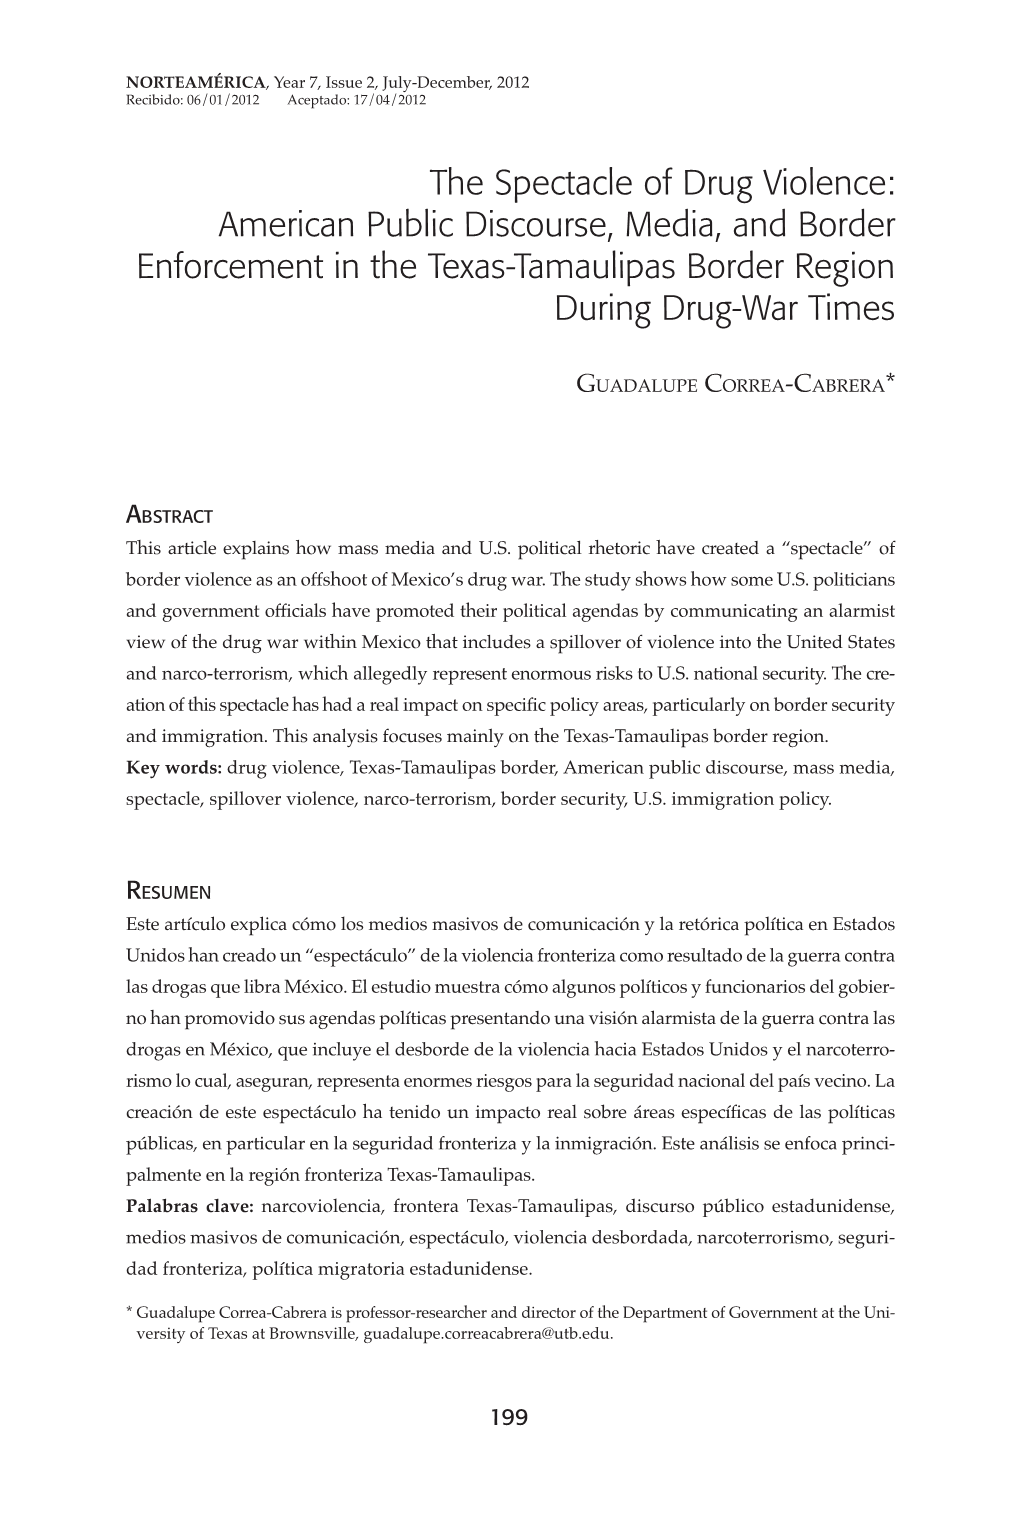 The Spectacle of Drug Violence: American Public Discourse, Media, and Border Enforcement in the Texas-Tamaulipas Border Region During Drug-War Times